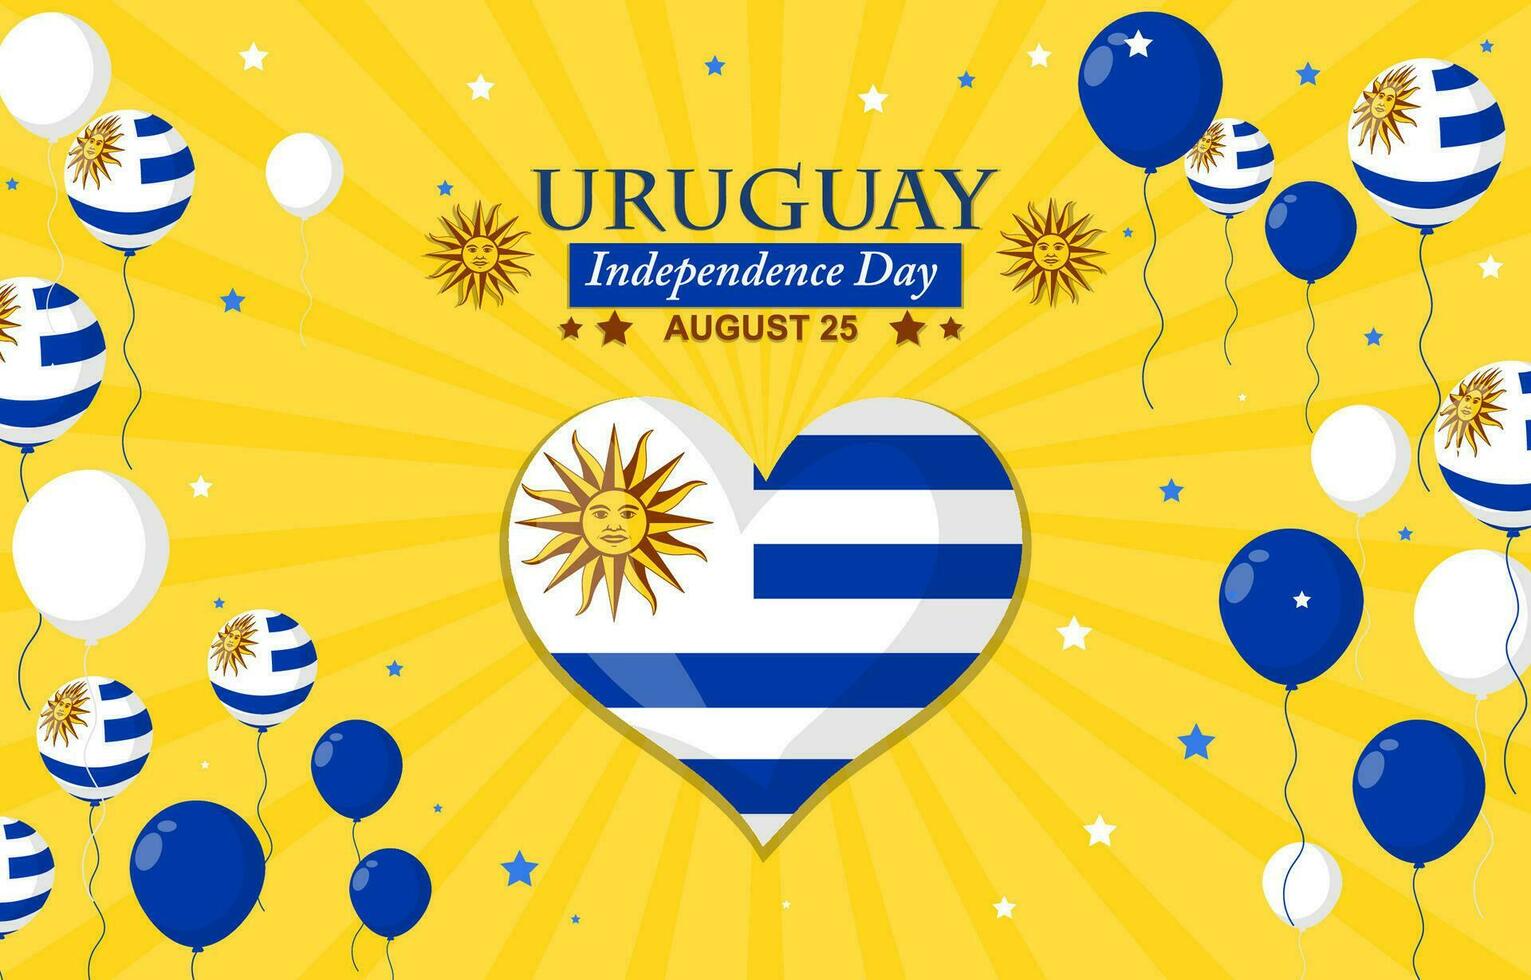 uruguay Independence Day Background vector